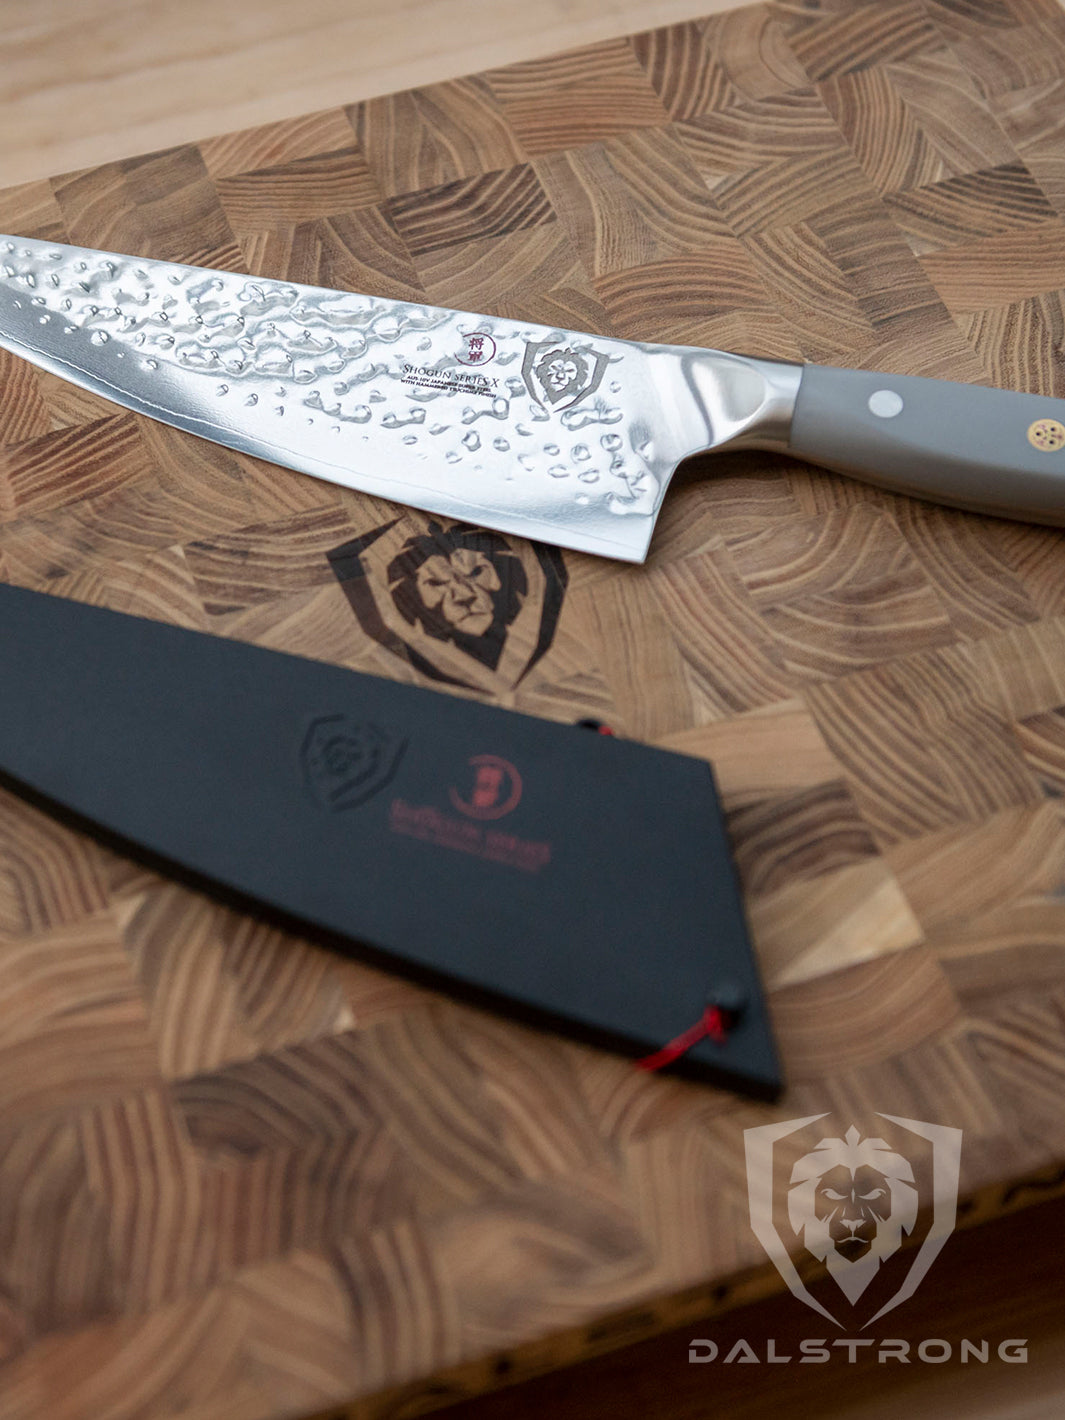 Dalstrong shogun series 8 inch chef knife with gray matte handle and sheath on top of a Dalstrong wooden board.